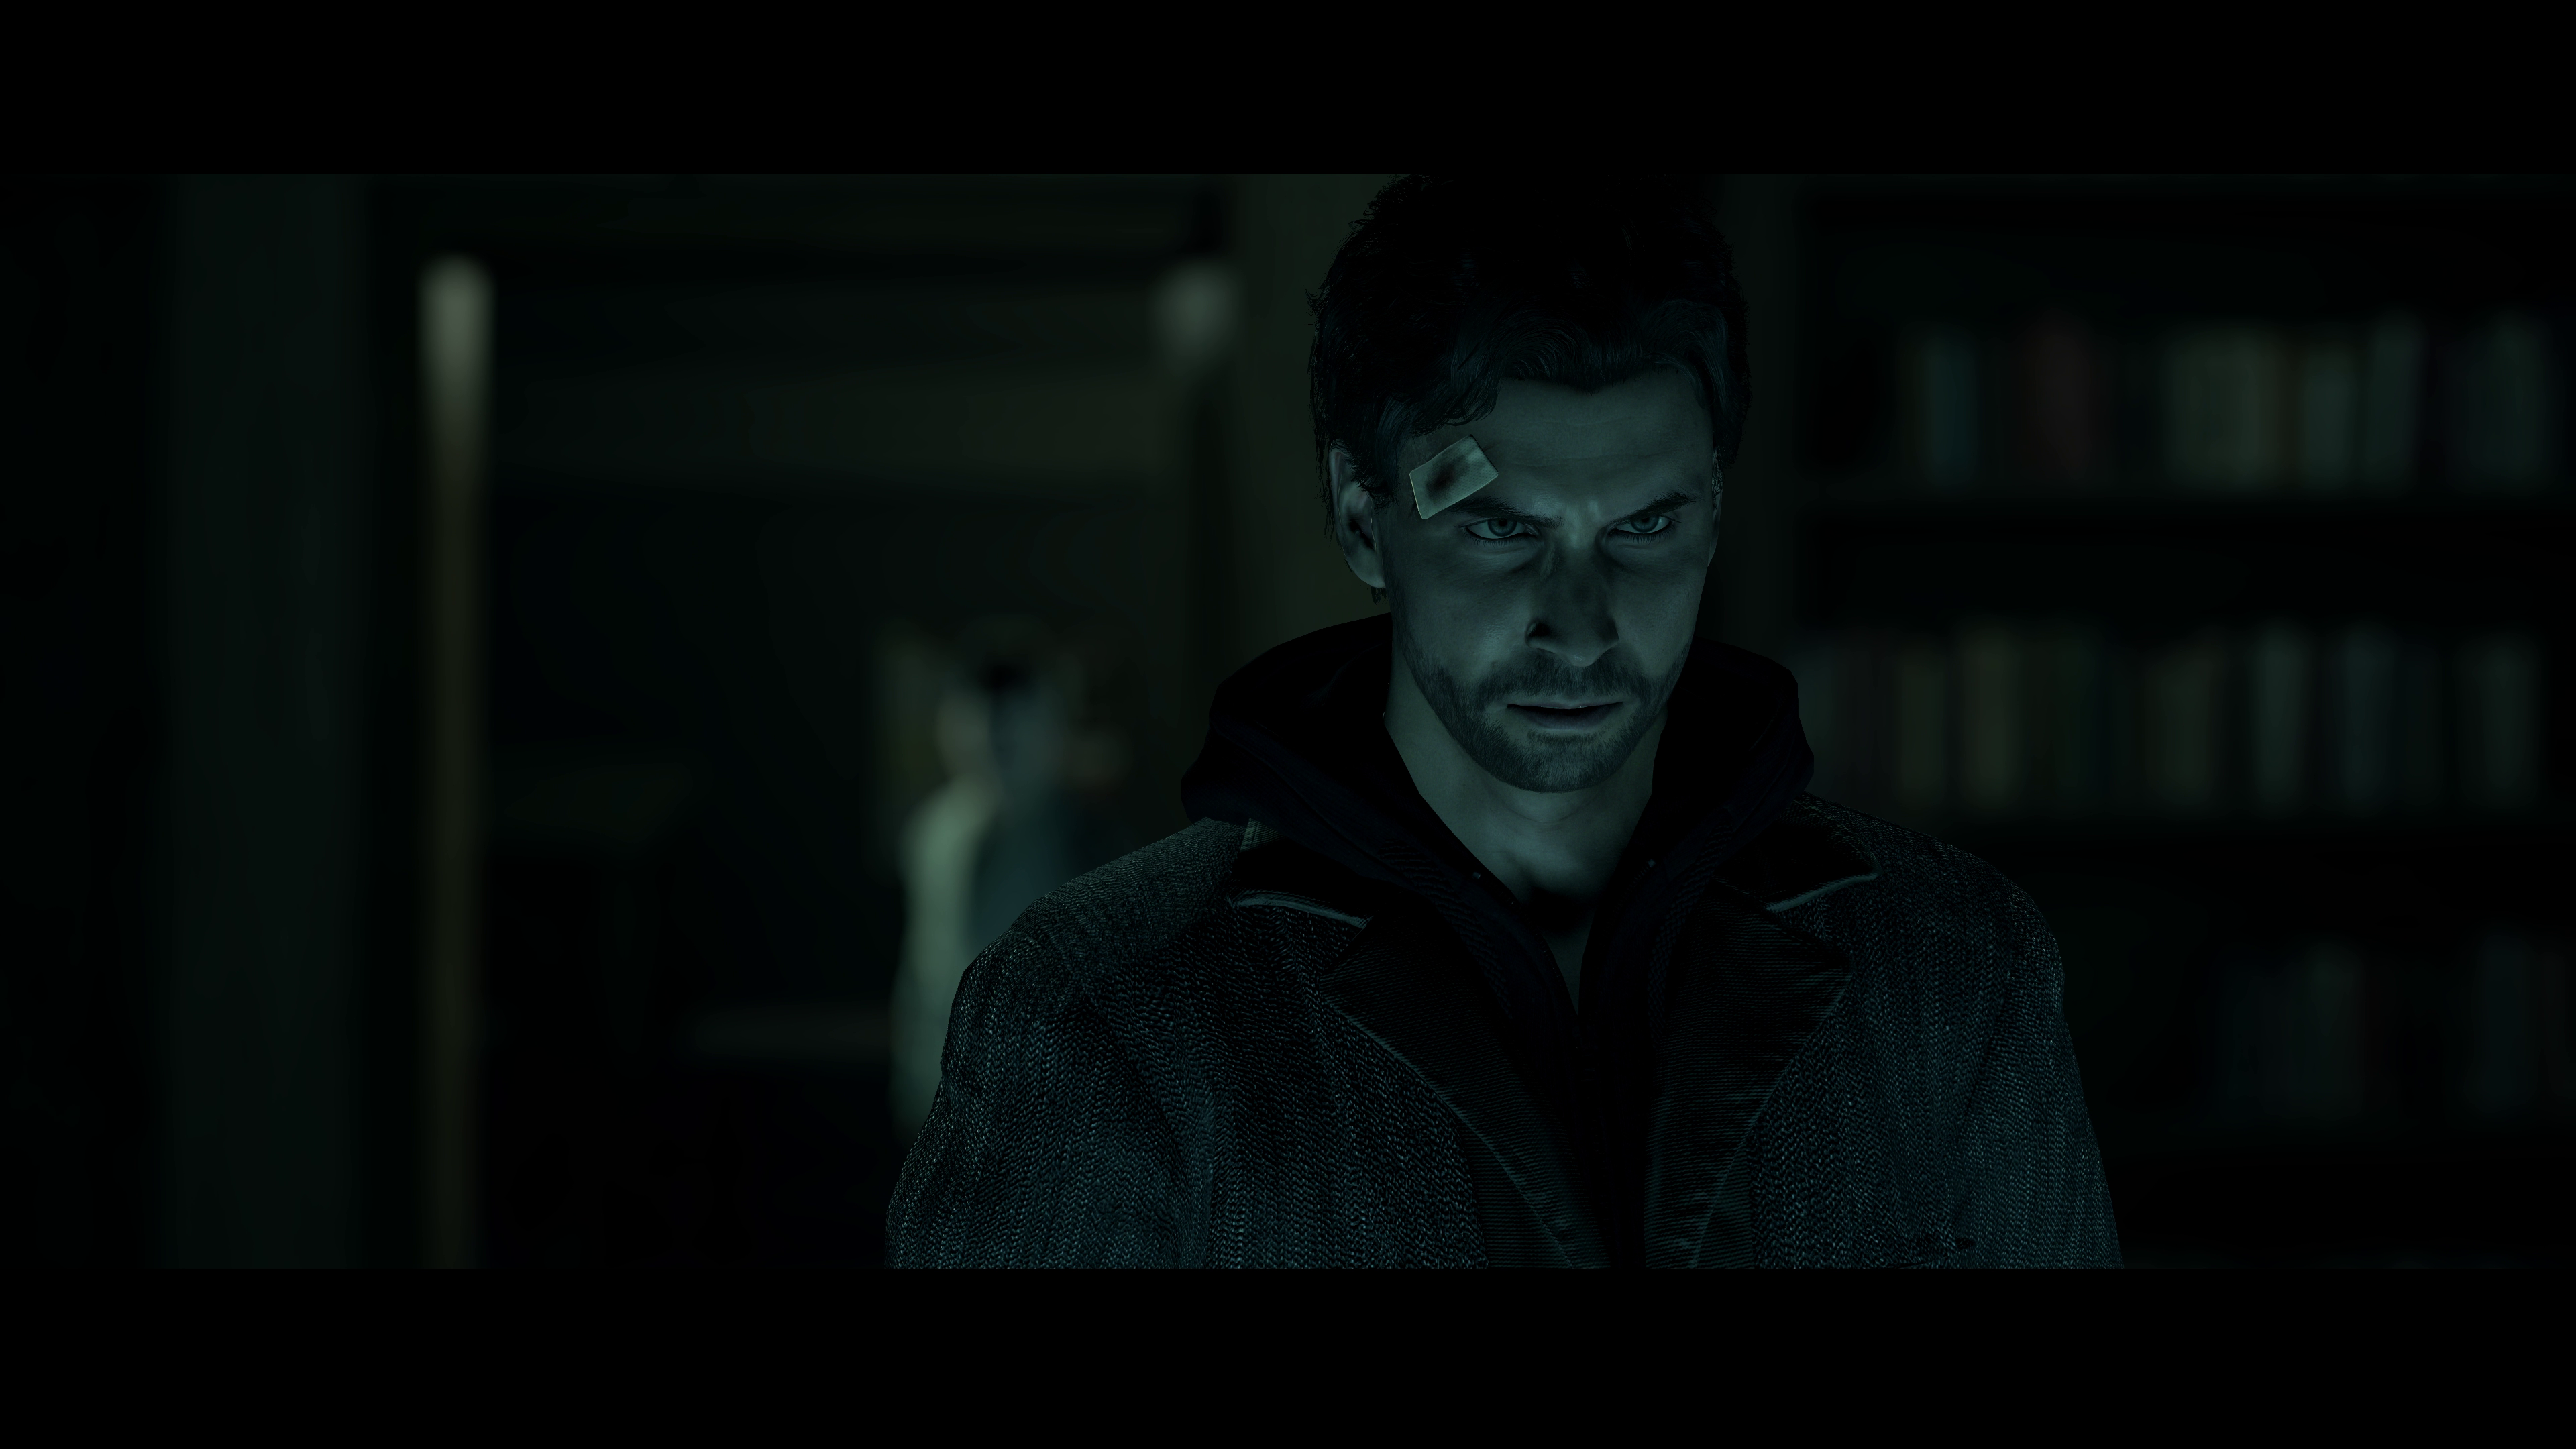 Alan Wake Remastered struggles to justify its own existence